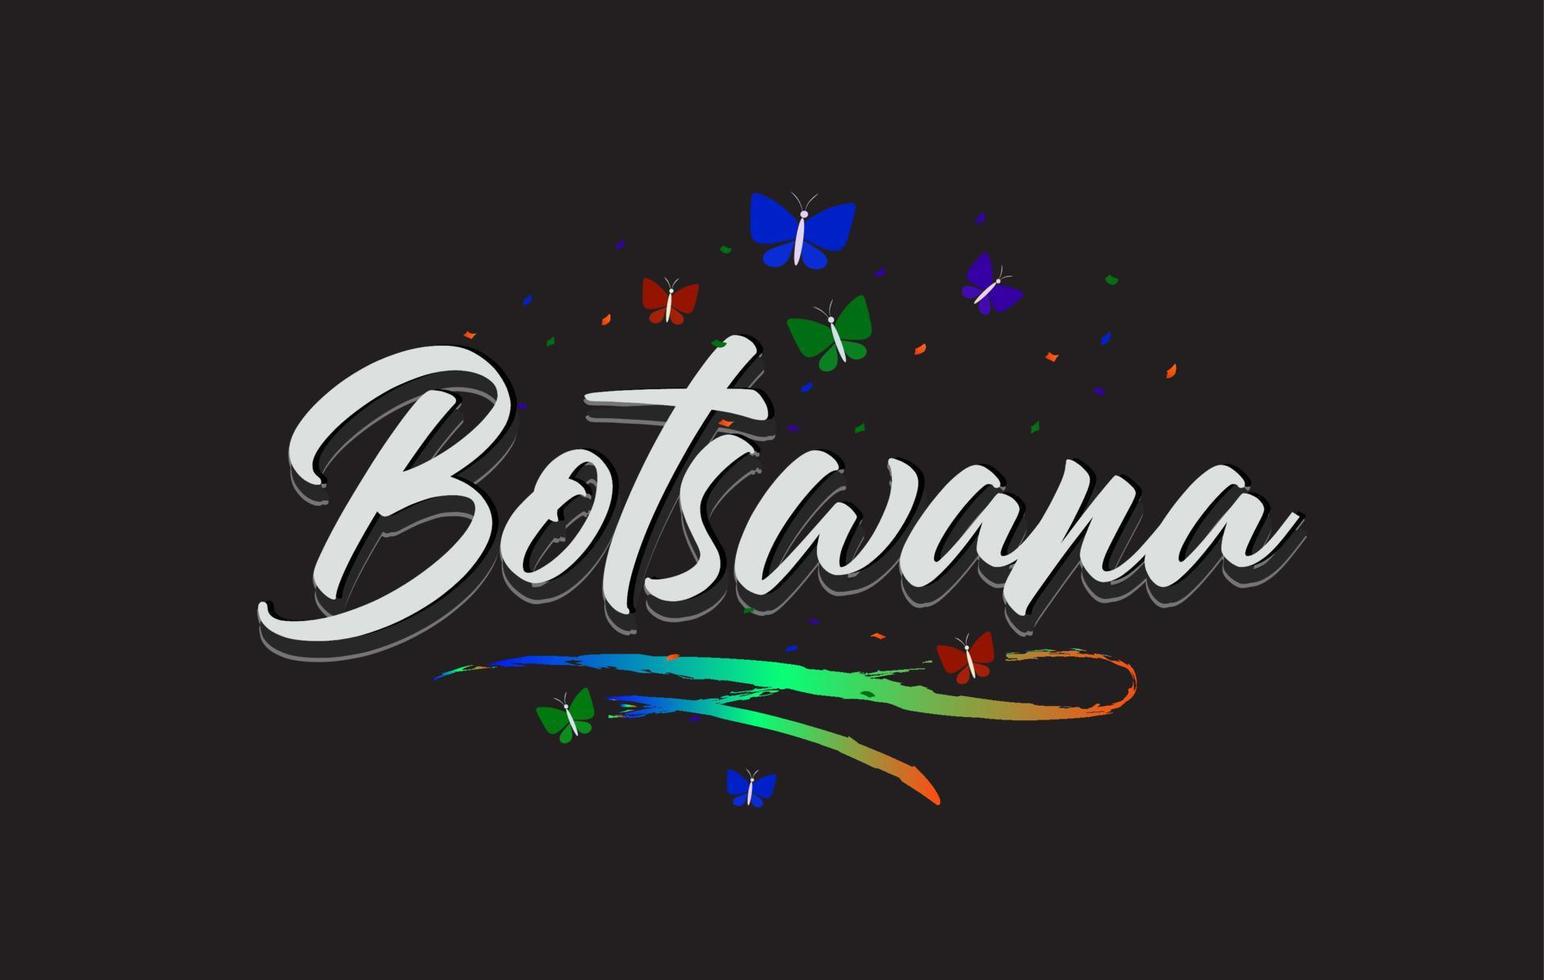 White Botswana Handwritten Vector Word Text with Butterflies and Colorful Swoosh.